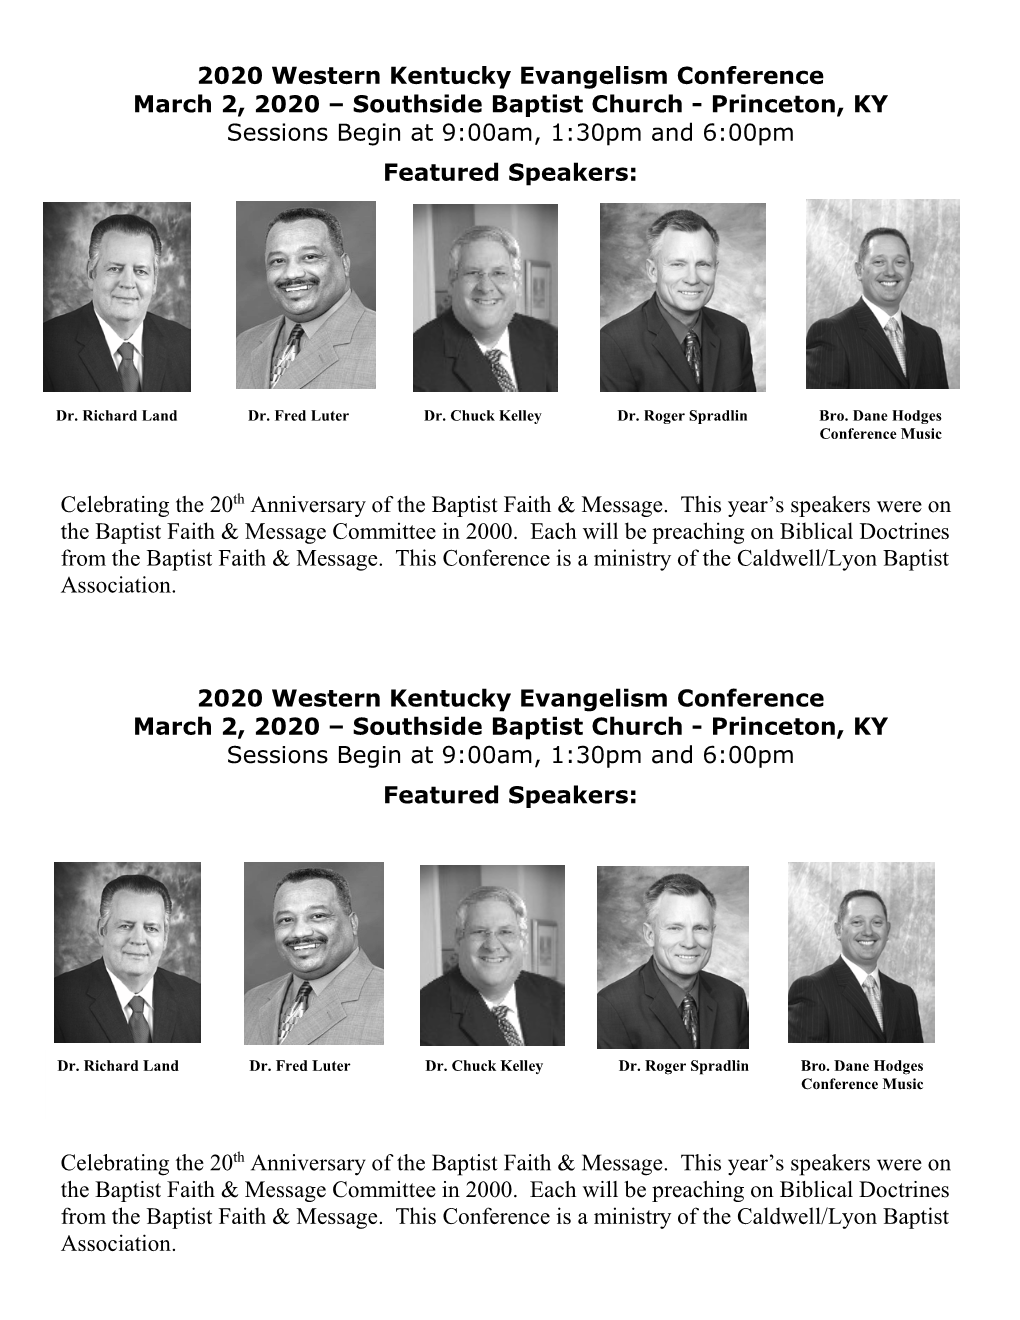 2020 Western Kentucky Evangelism Conference March 2, 2020 – Southside Baptist Church - Princeton, KY Sessions Begin at 9:00Am, 1:30Pm and 6:00Pm Featured Speakers